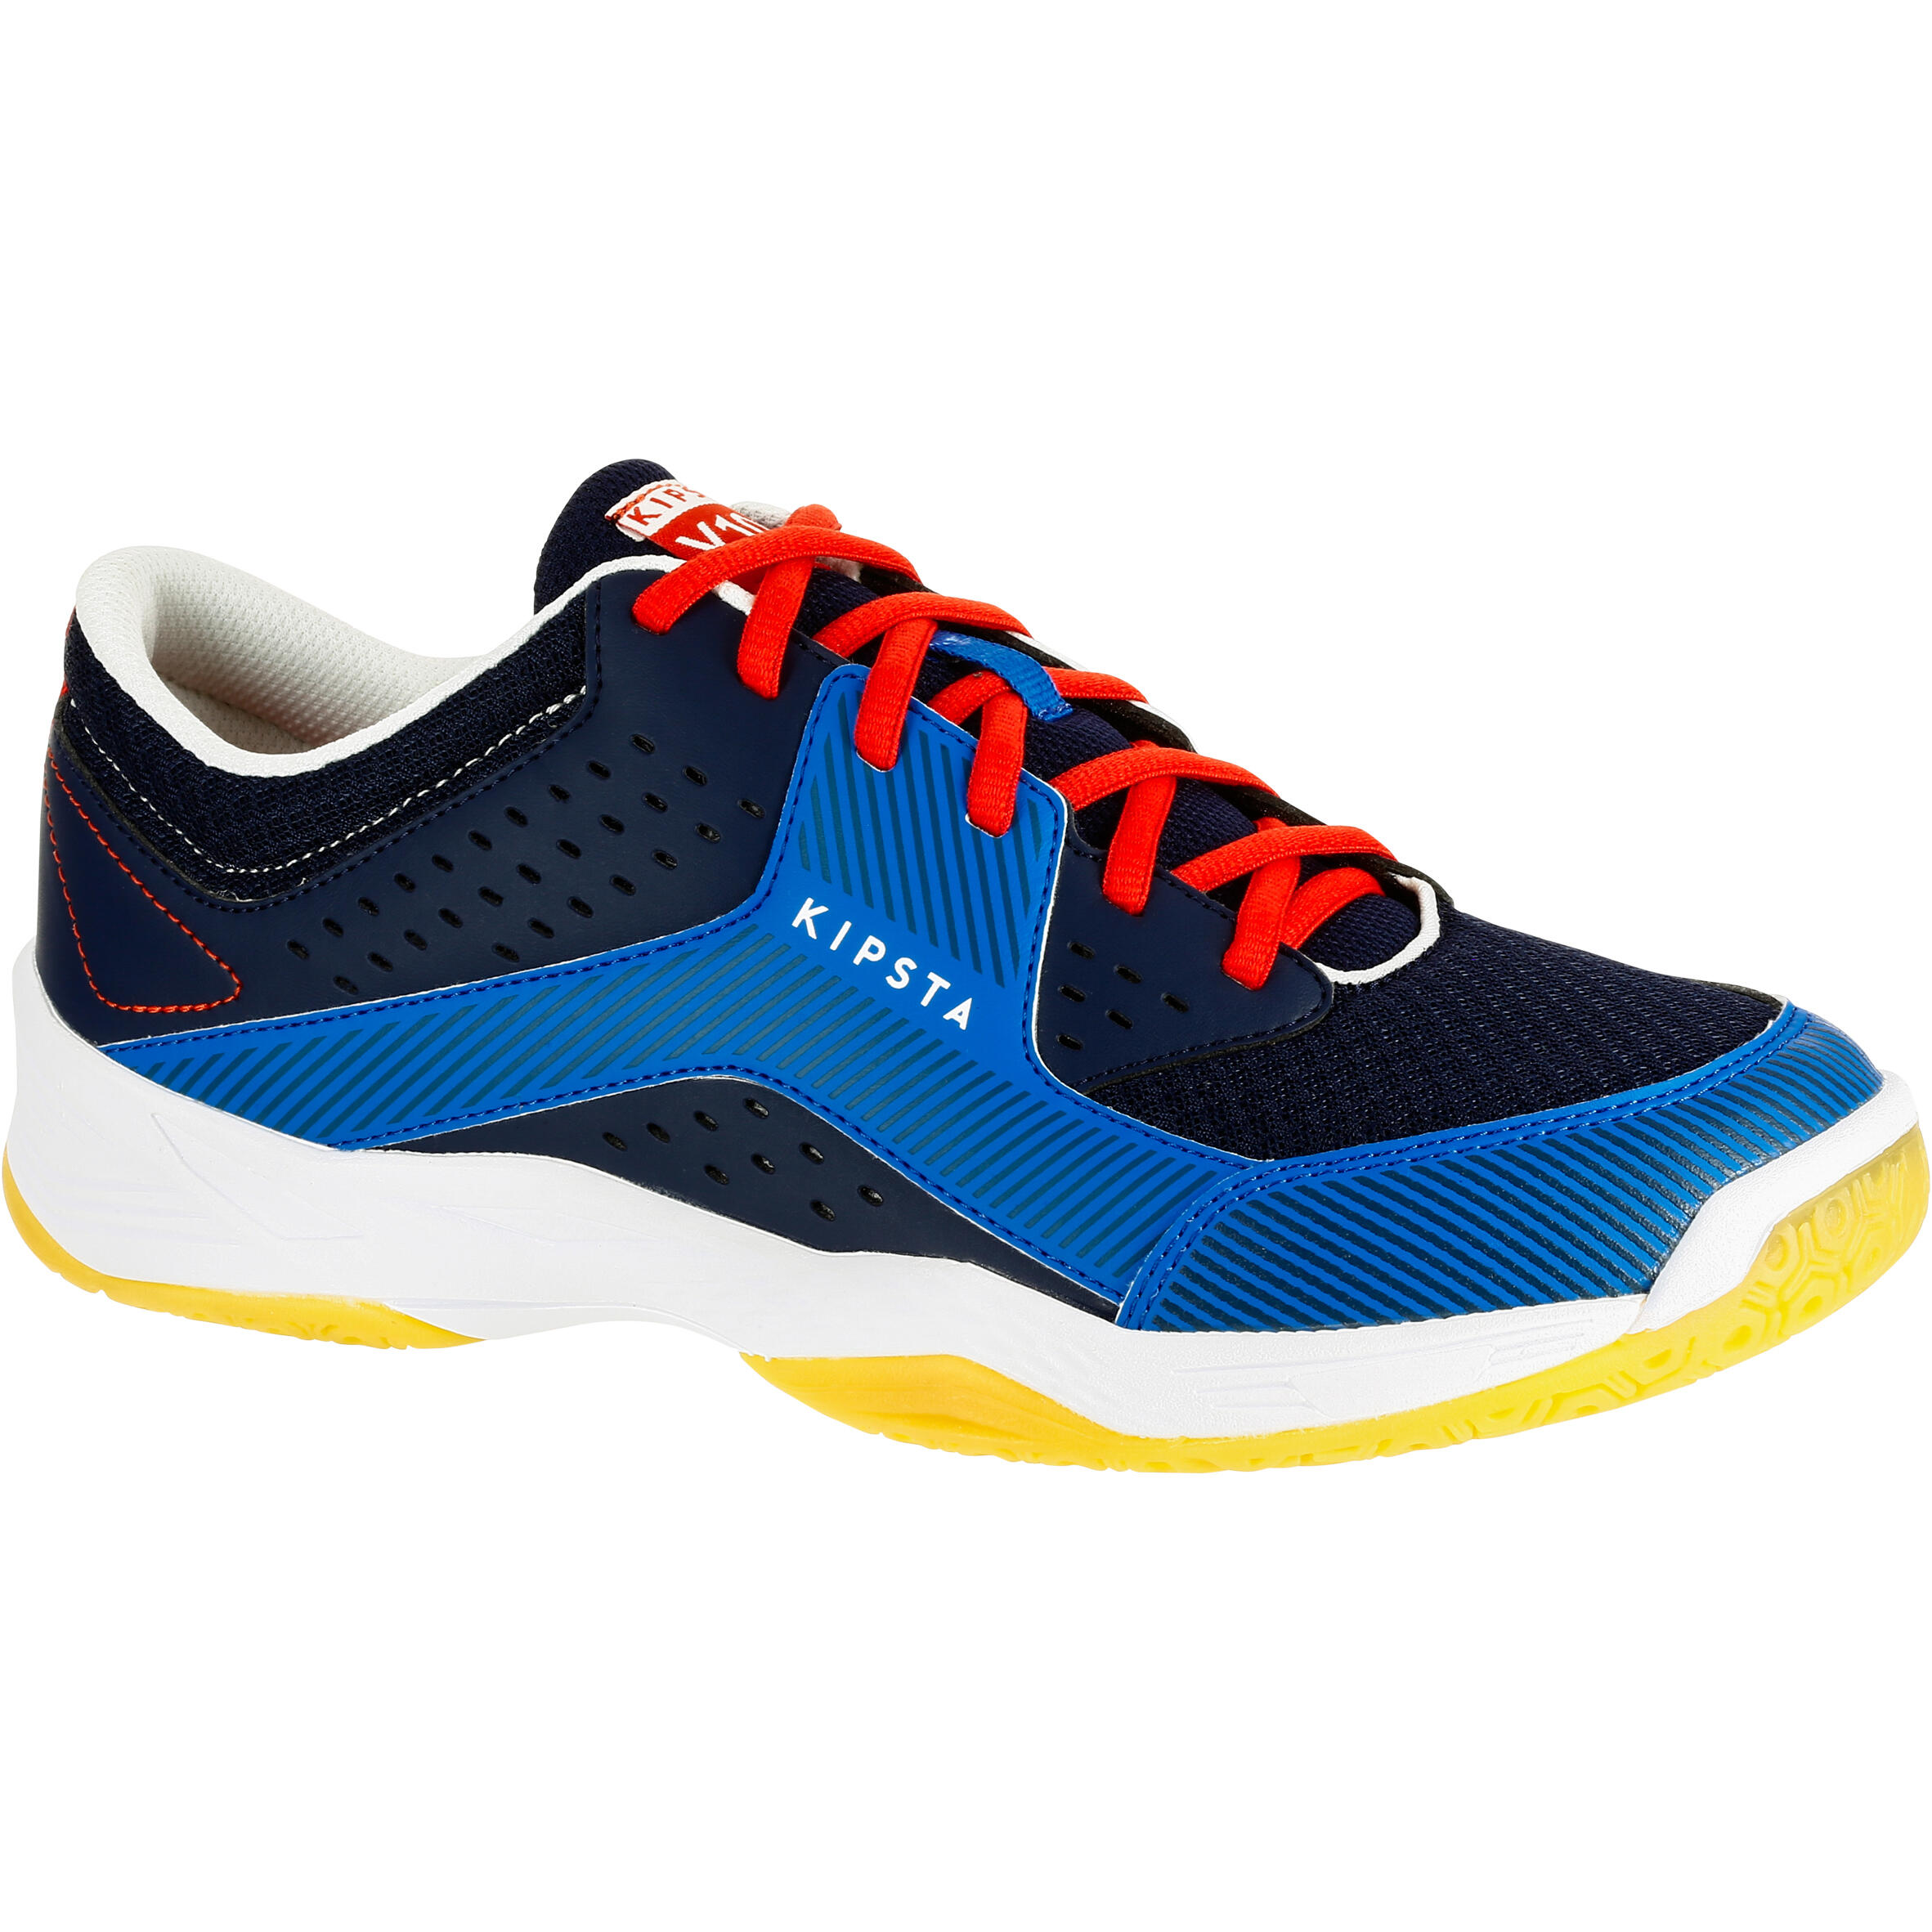 kipsta volleyball shoes